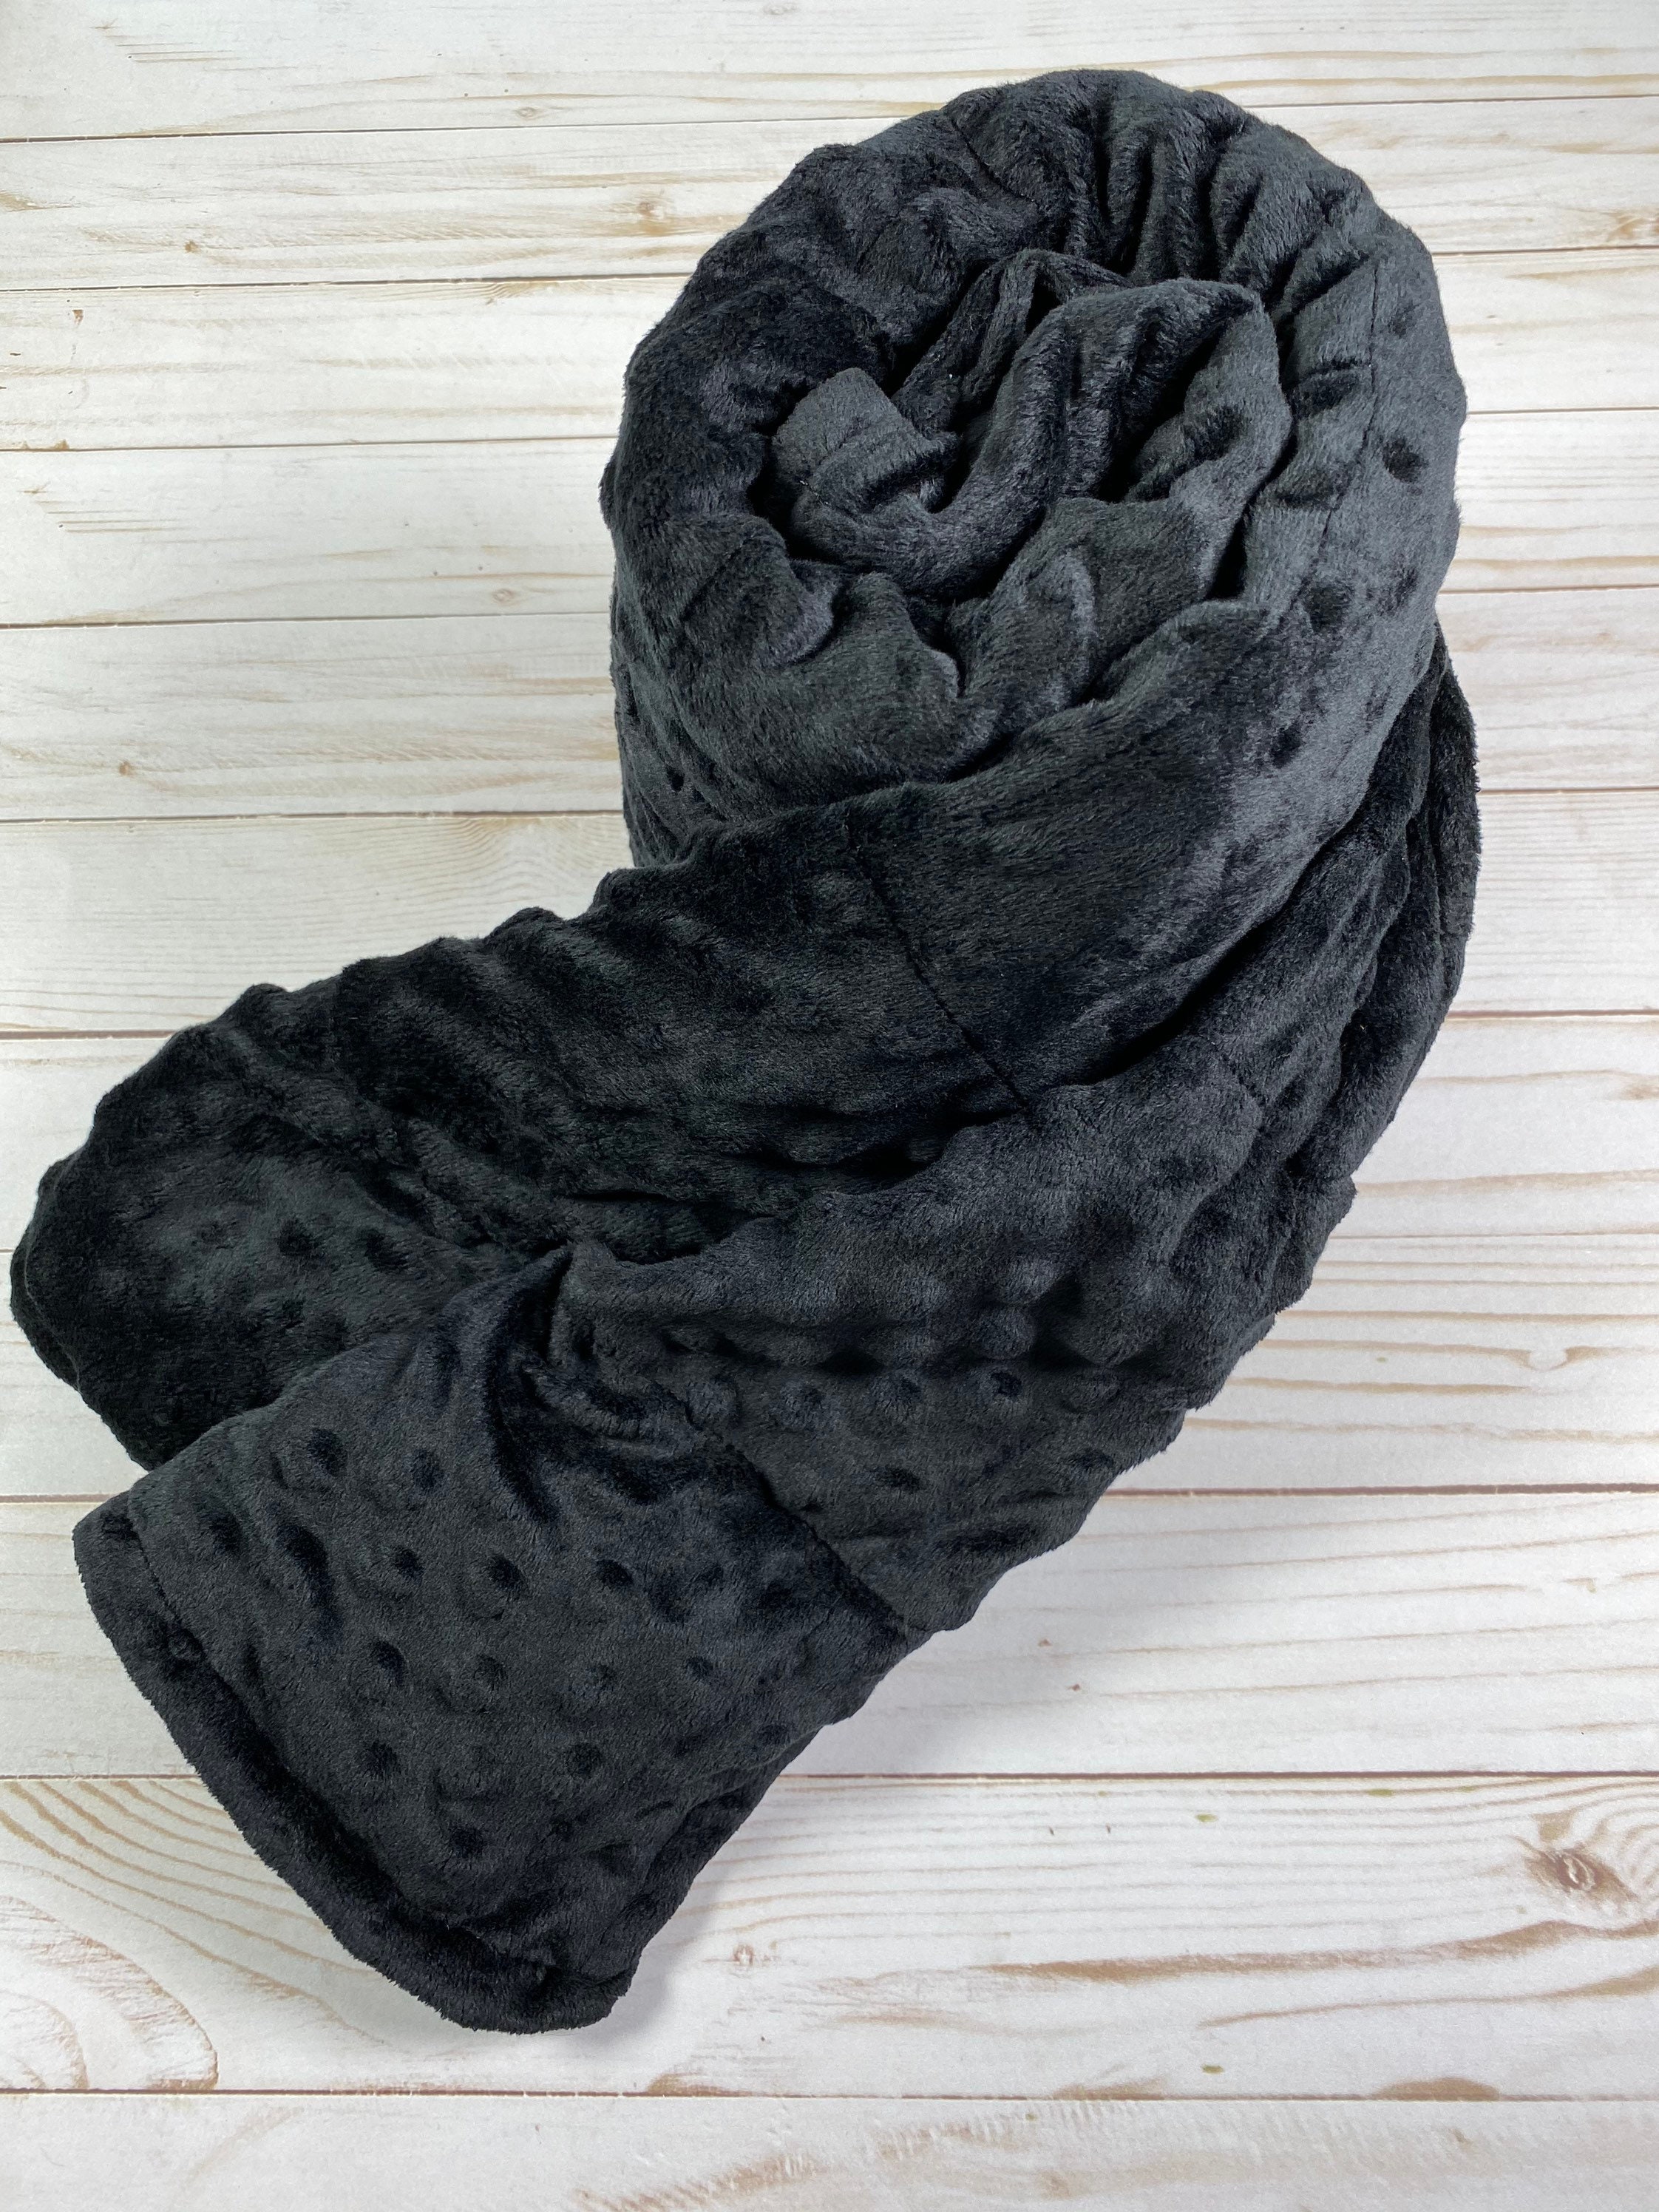 6 Pound Black Minky Weighted blanket, Ready to Ship child size weighted